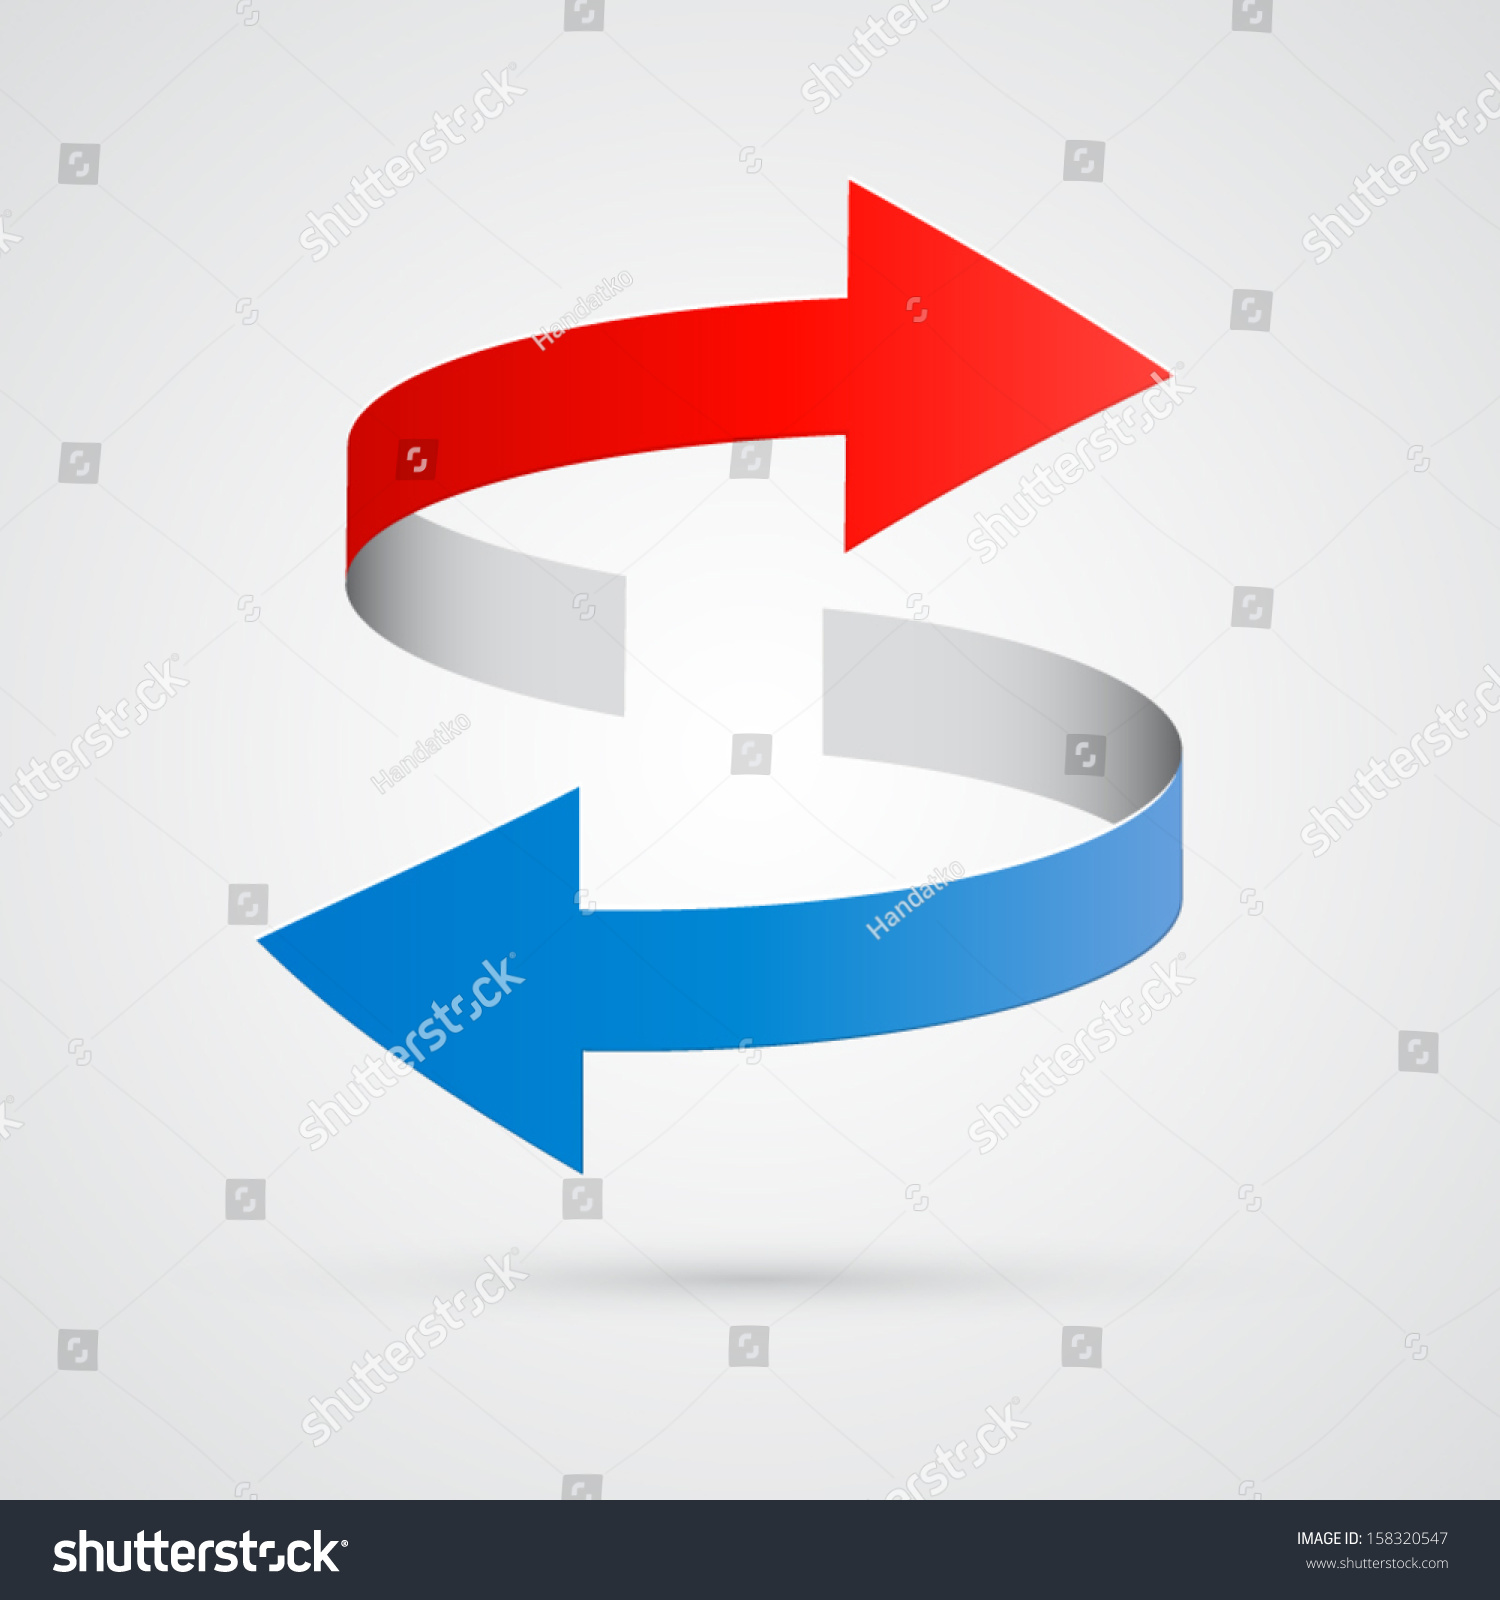 vector 3d red and blue arrows #158320547